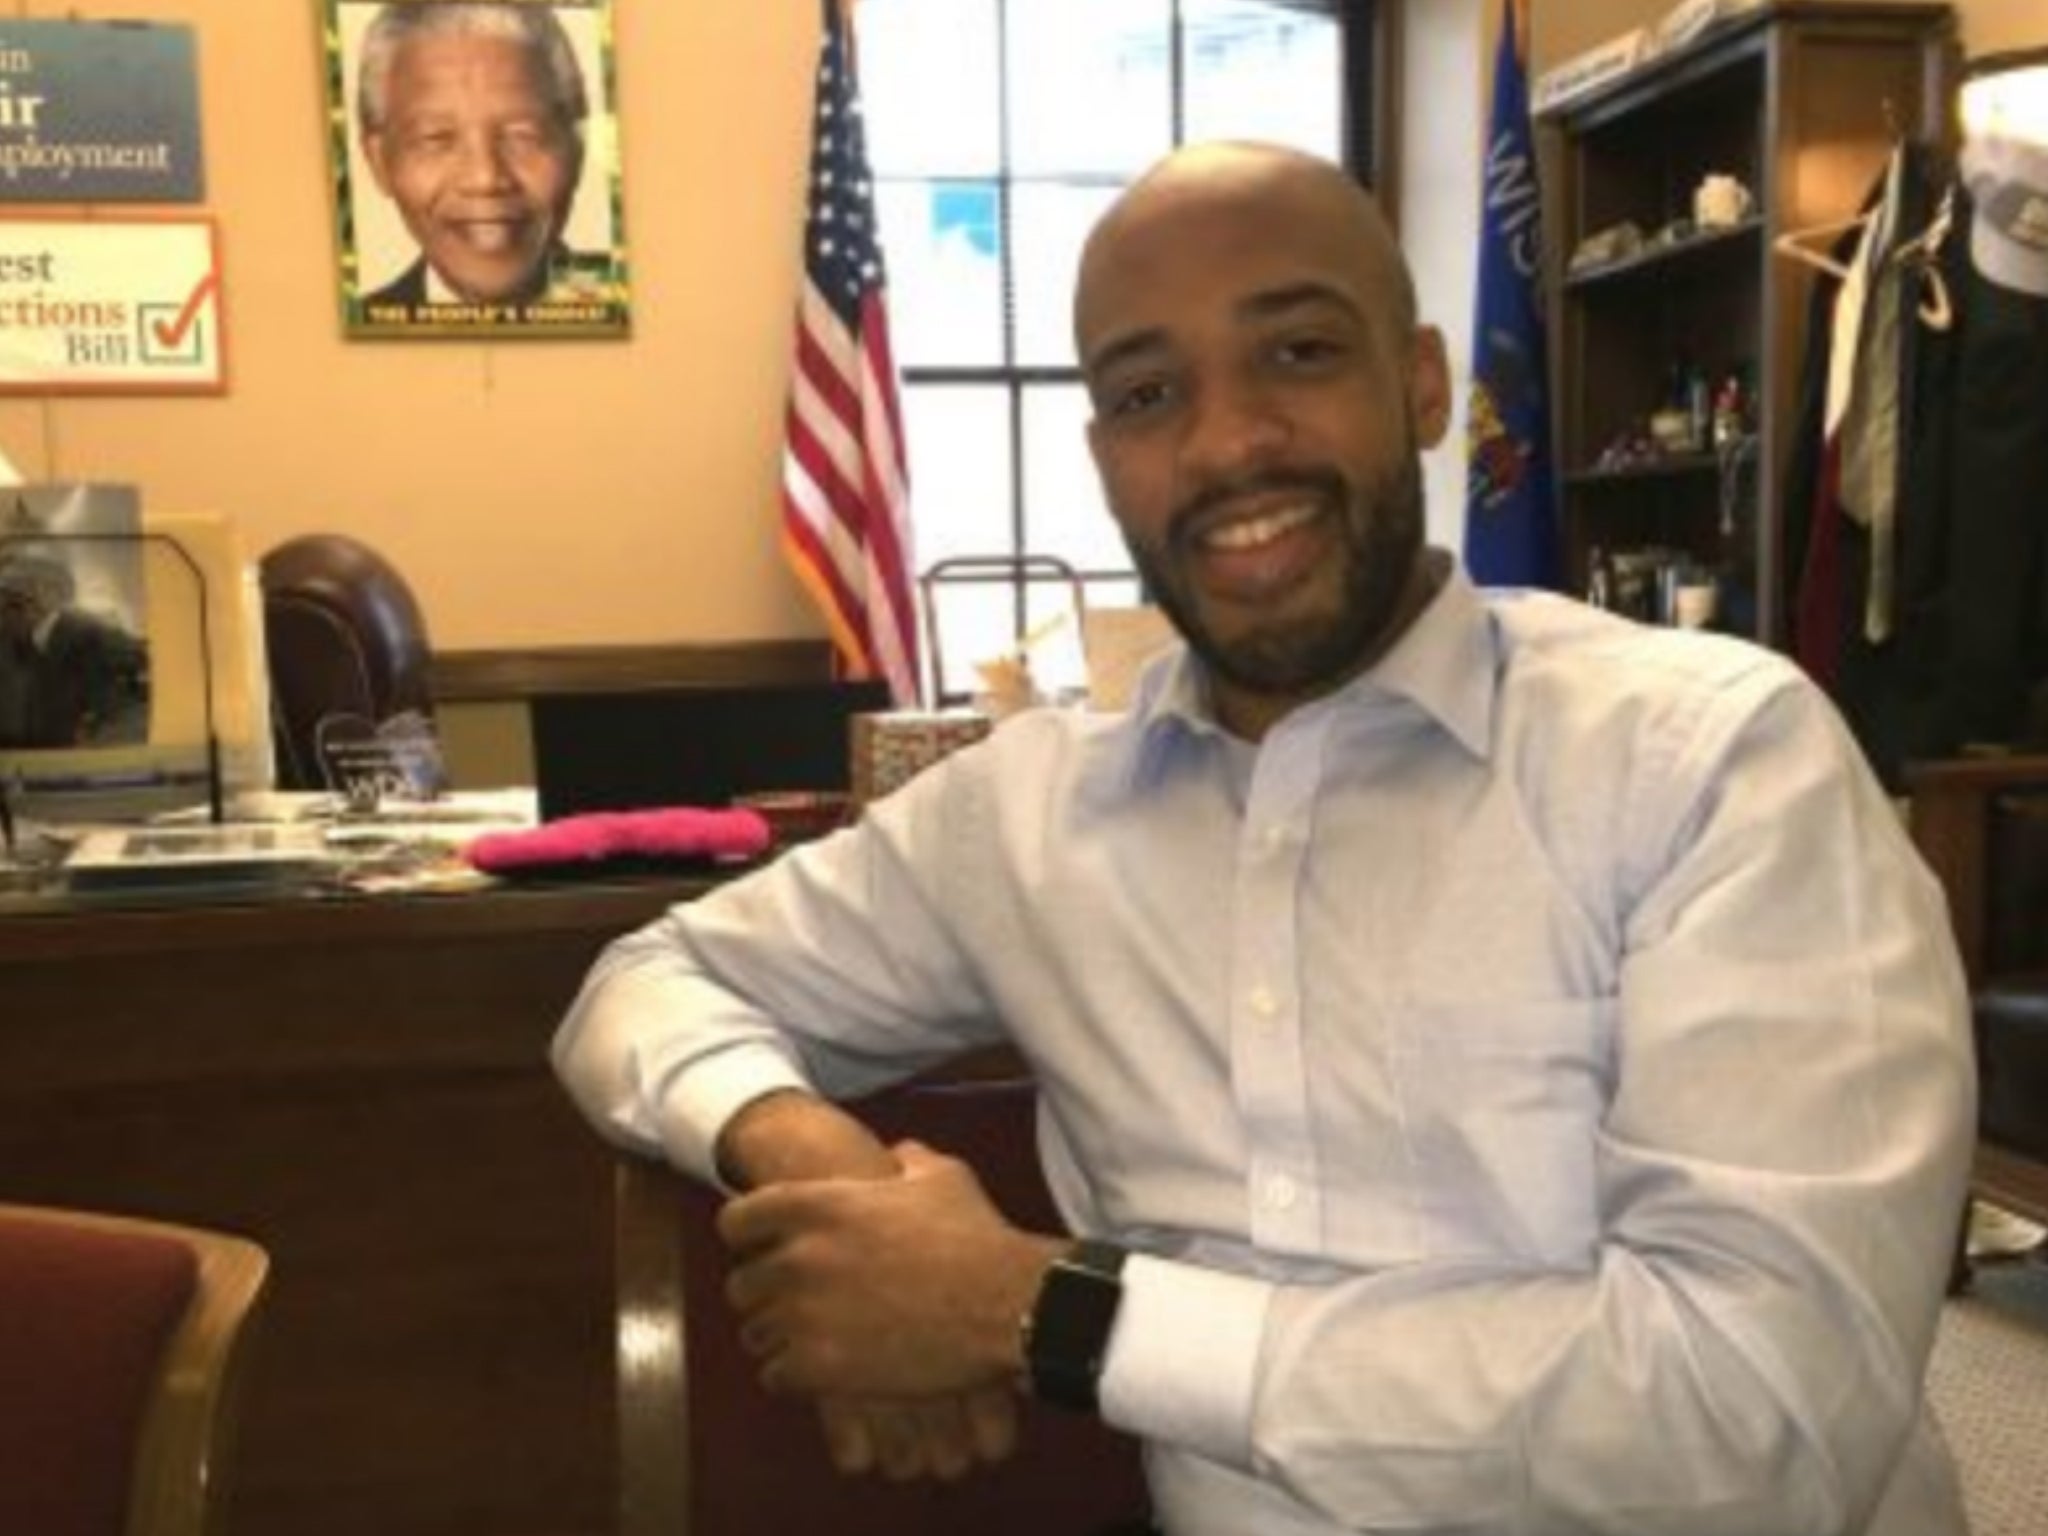 Mandela Barnes, a Democrat running for Lieutenant Governor in Wisconsin, was left out of newspaper notices and had to prove he was alive after a TV news report about a motorcycle accident the day before the primary election.